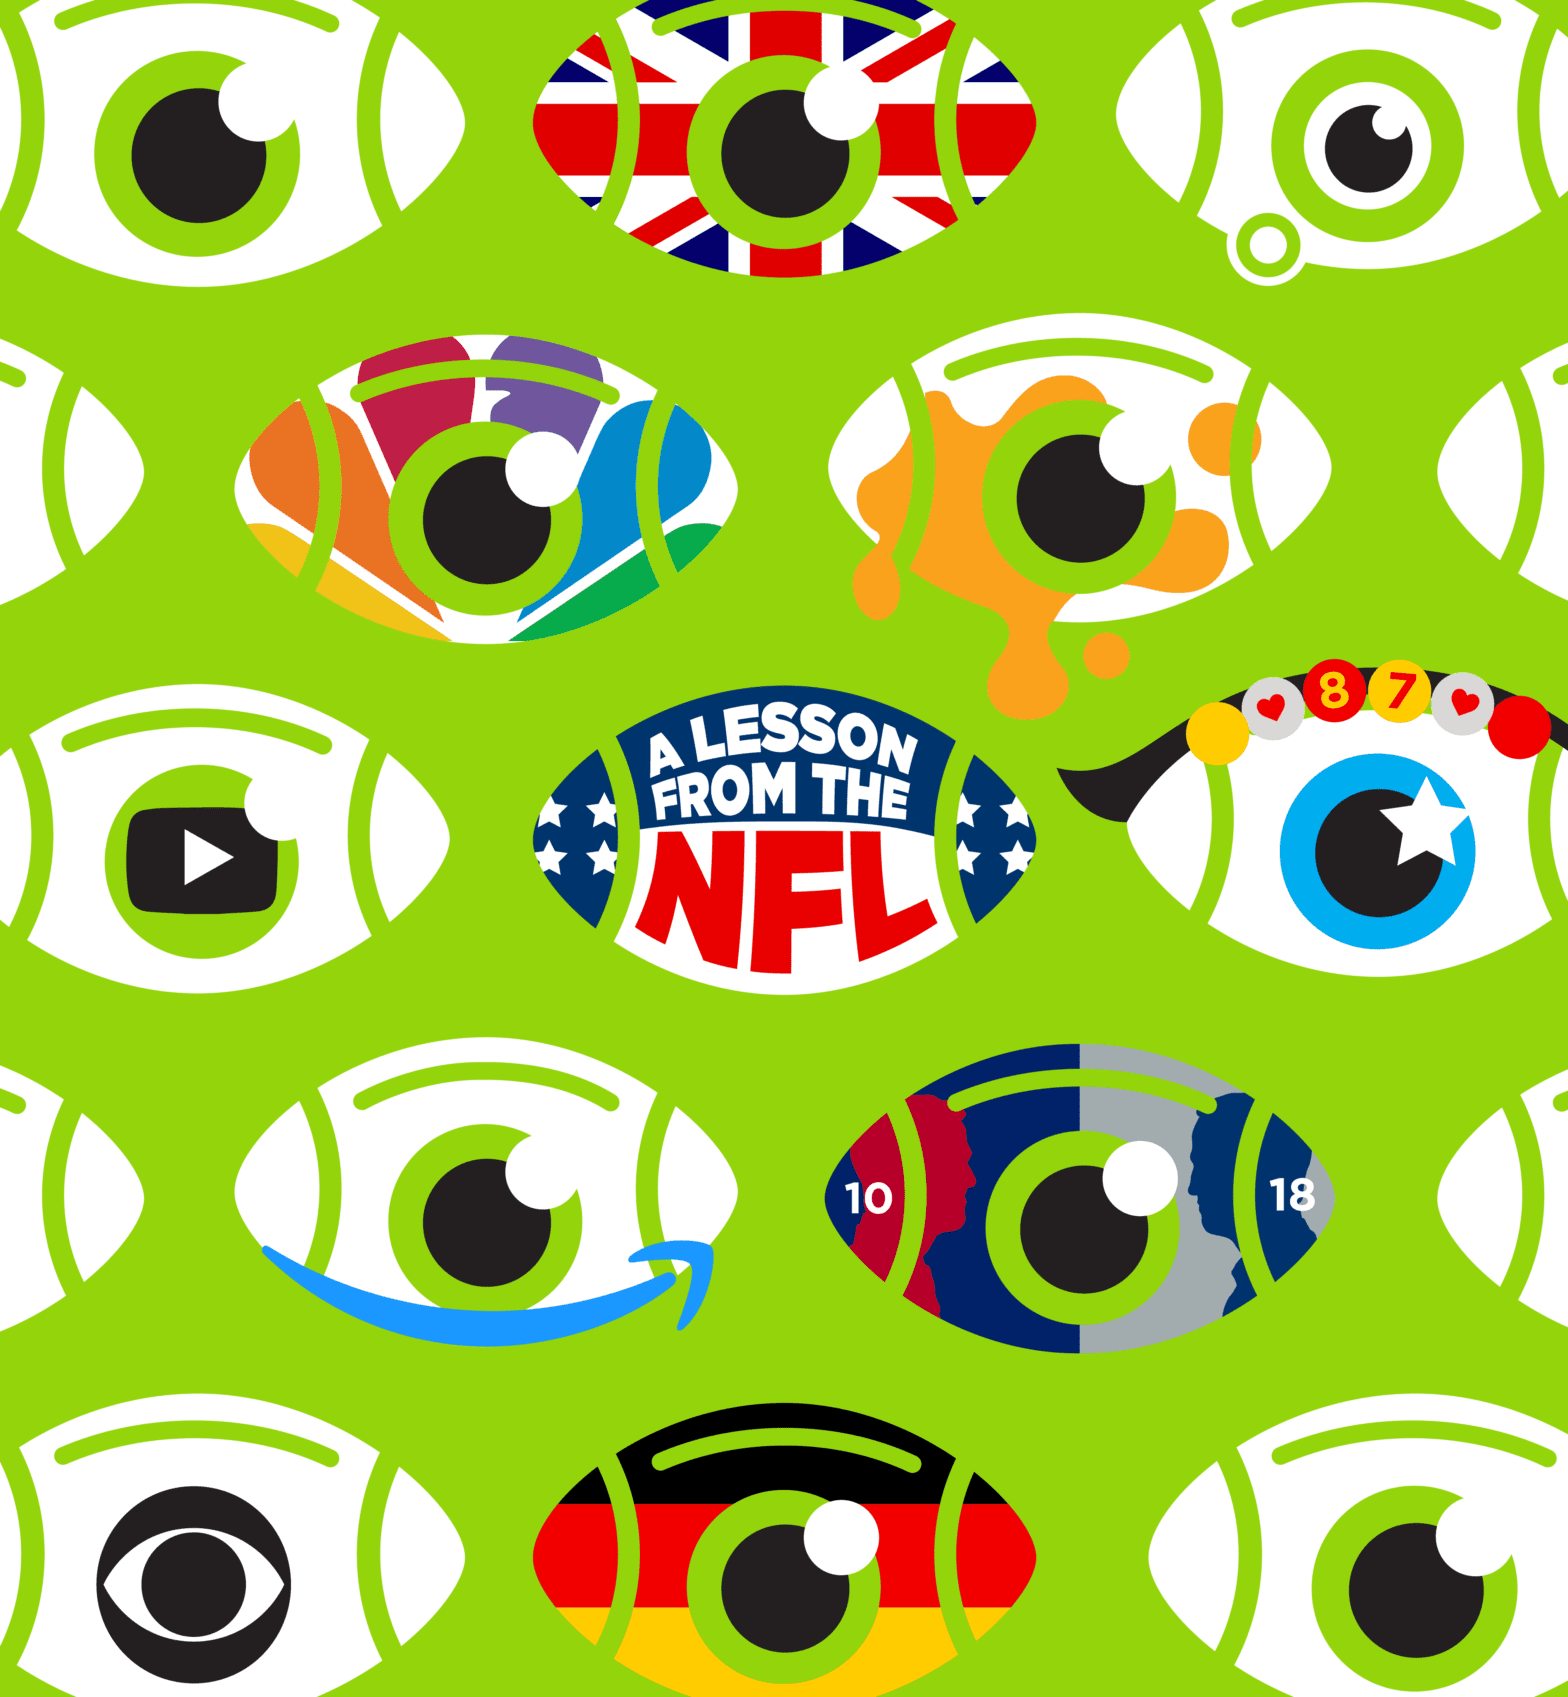 Multiple footballs designed to look like eyeballs with a Super Bowl Theme that incorporates the Amazon logo, an American flag, CBS logo, YouTube logo, and a Taylor Swift friendship bracelet on a bright green background.